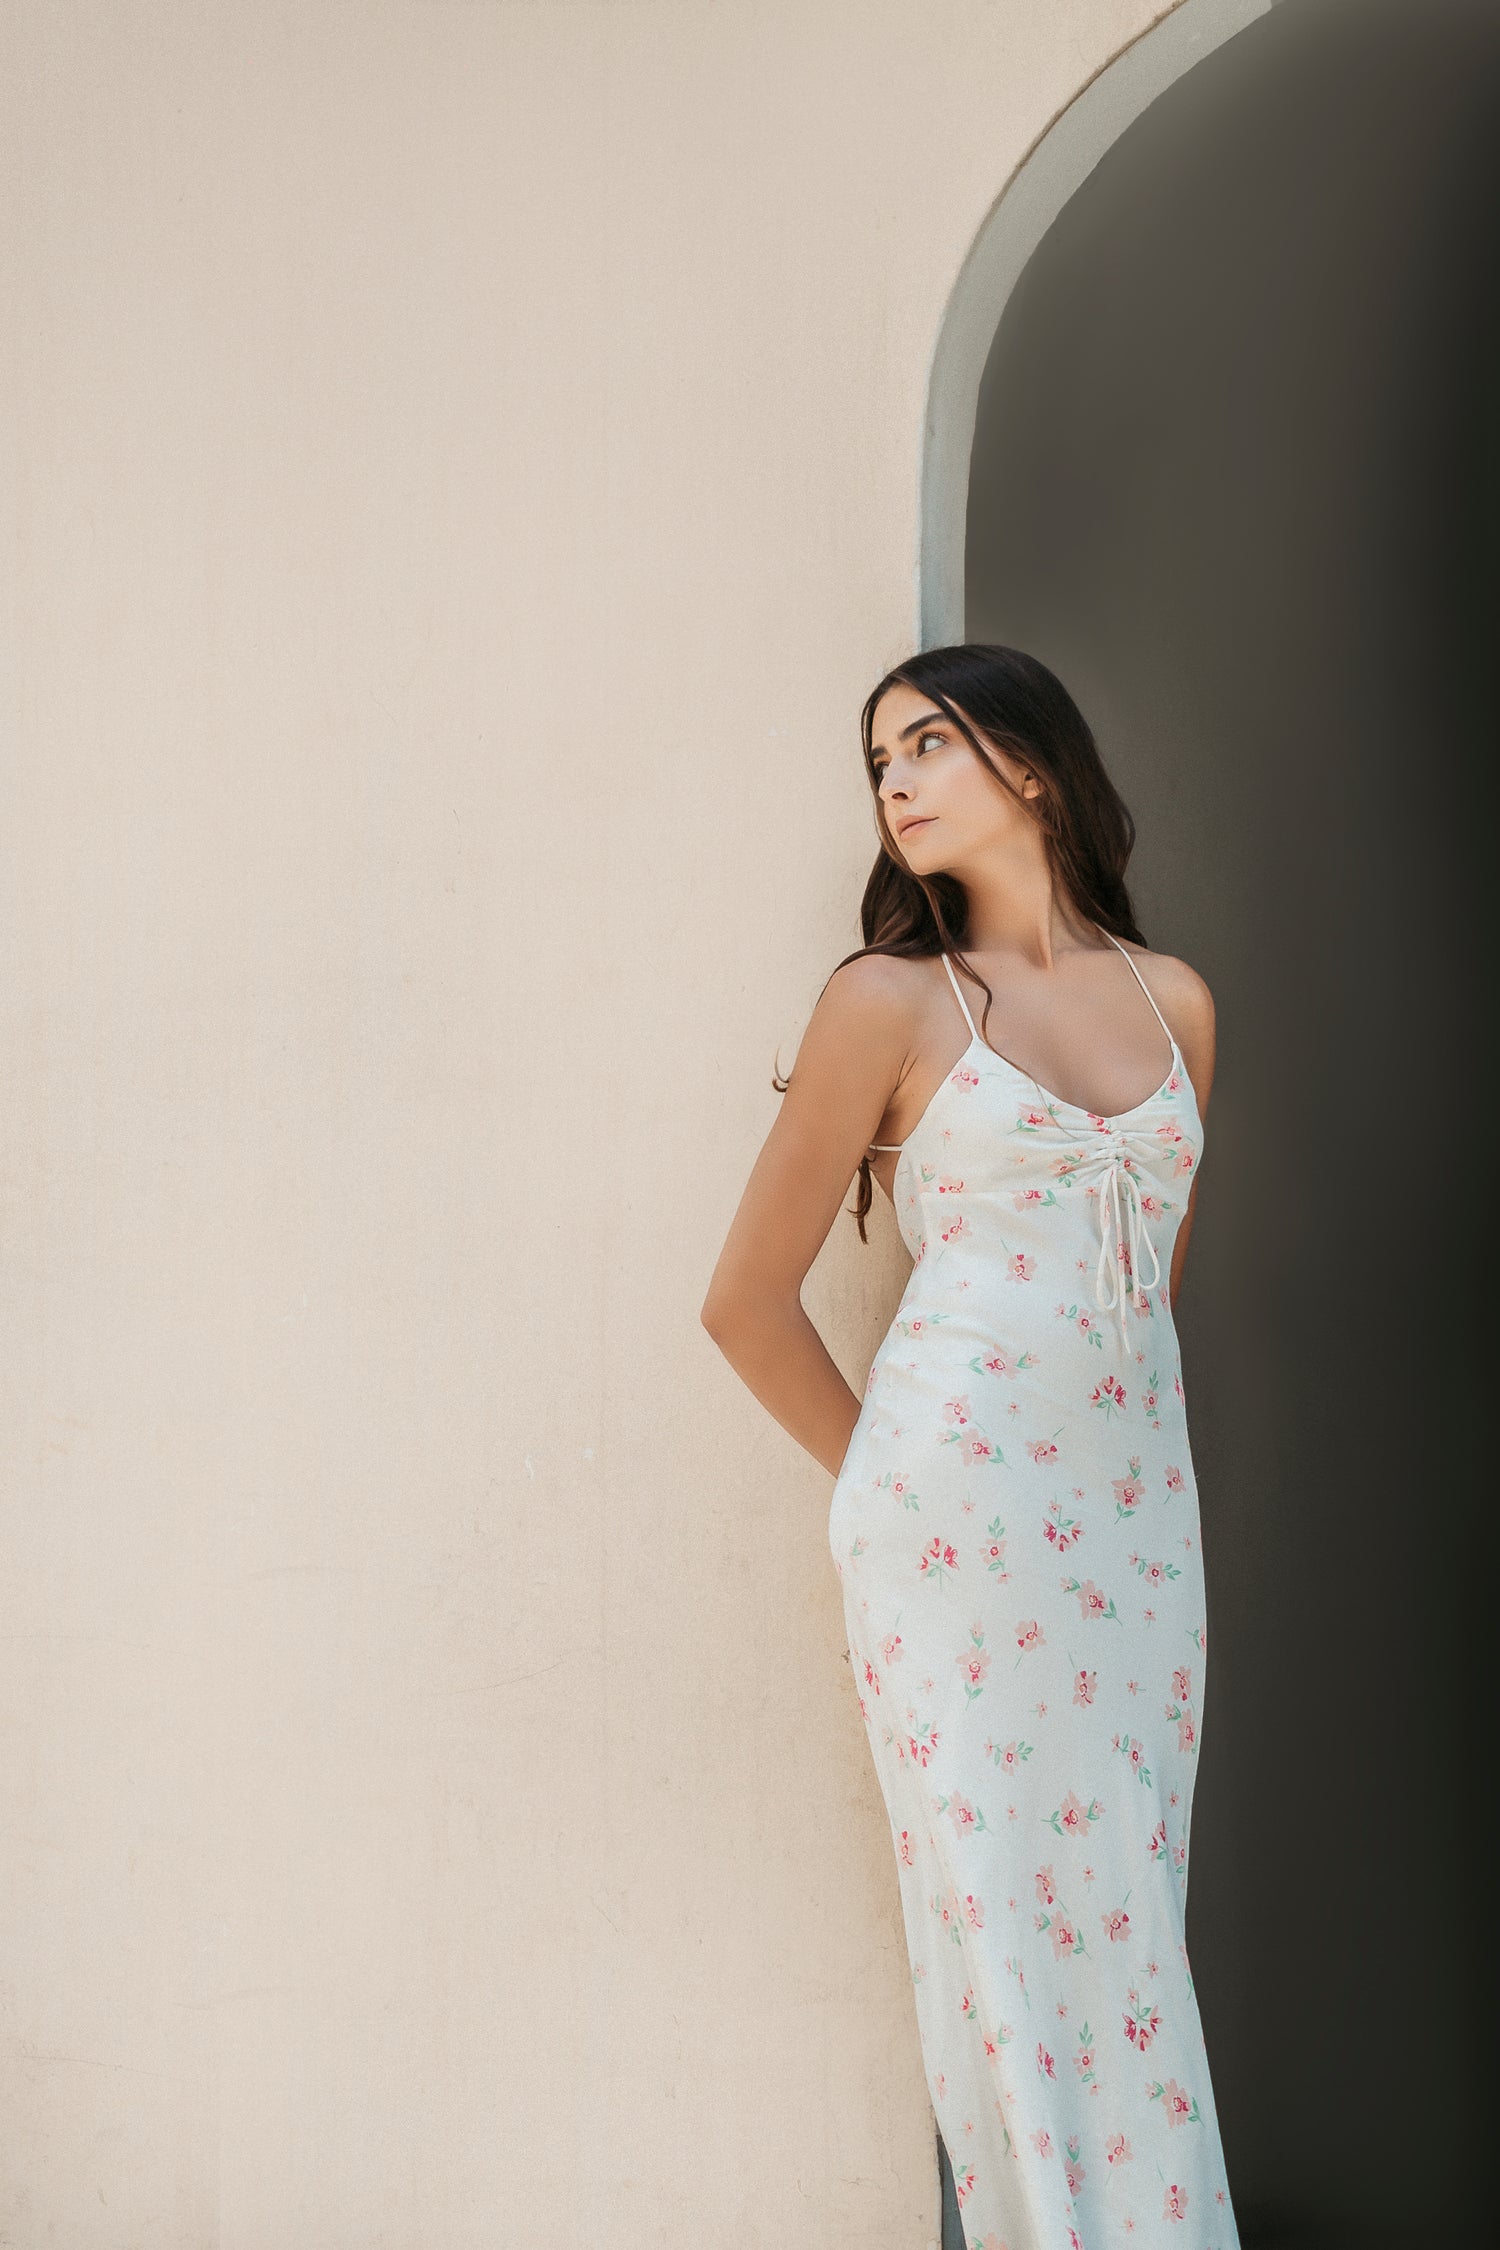 rosafa model in a white floral dress leaning against a wall